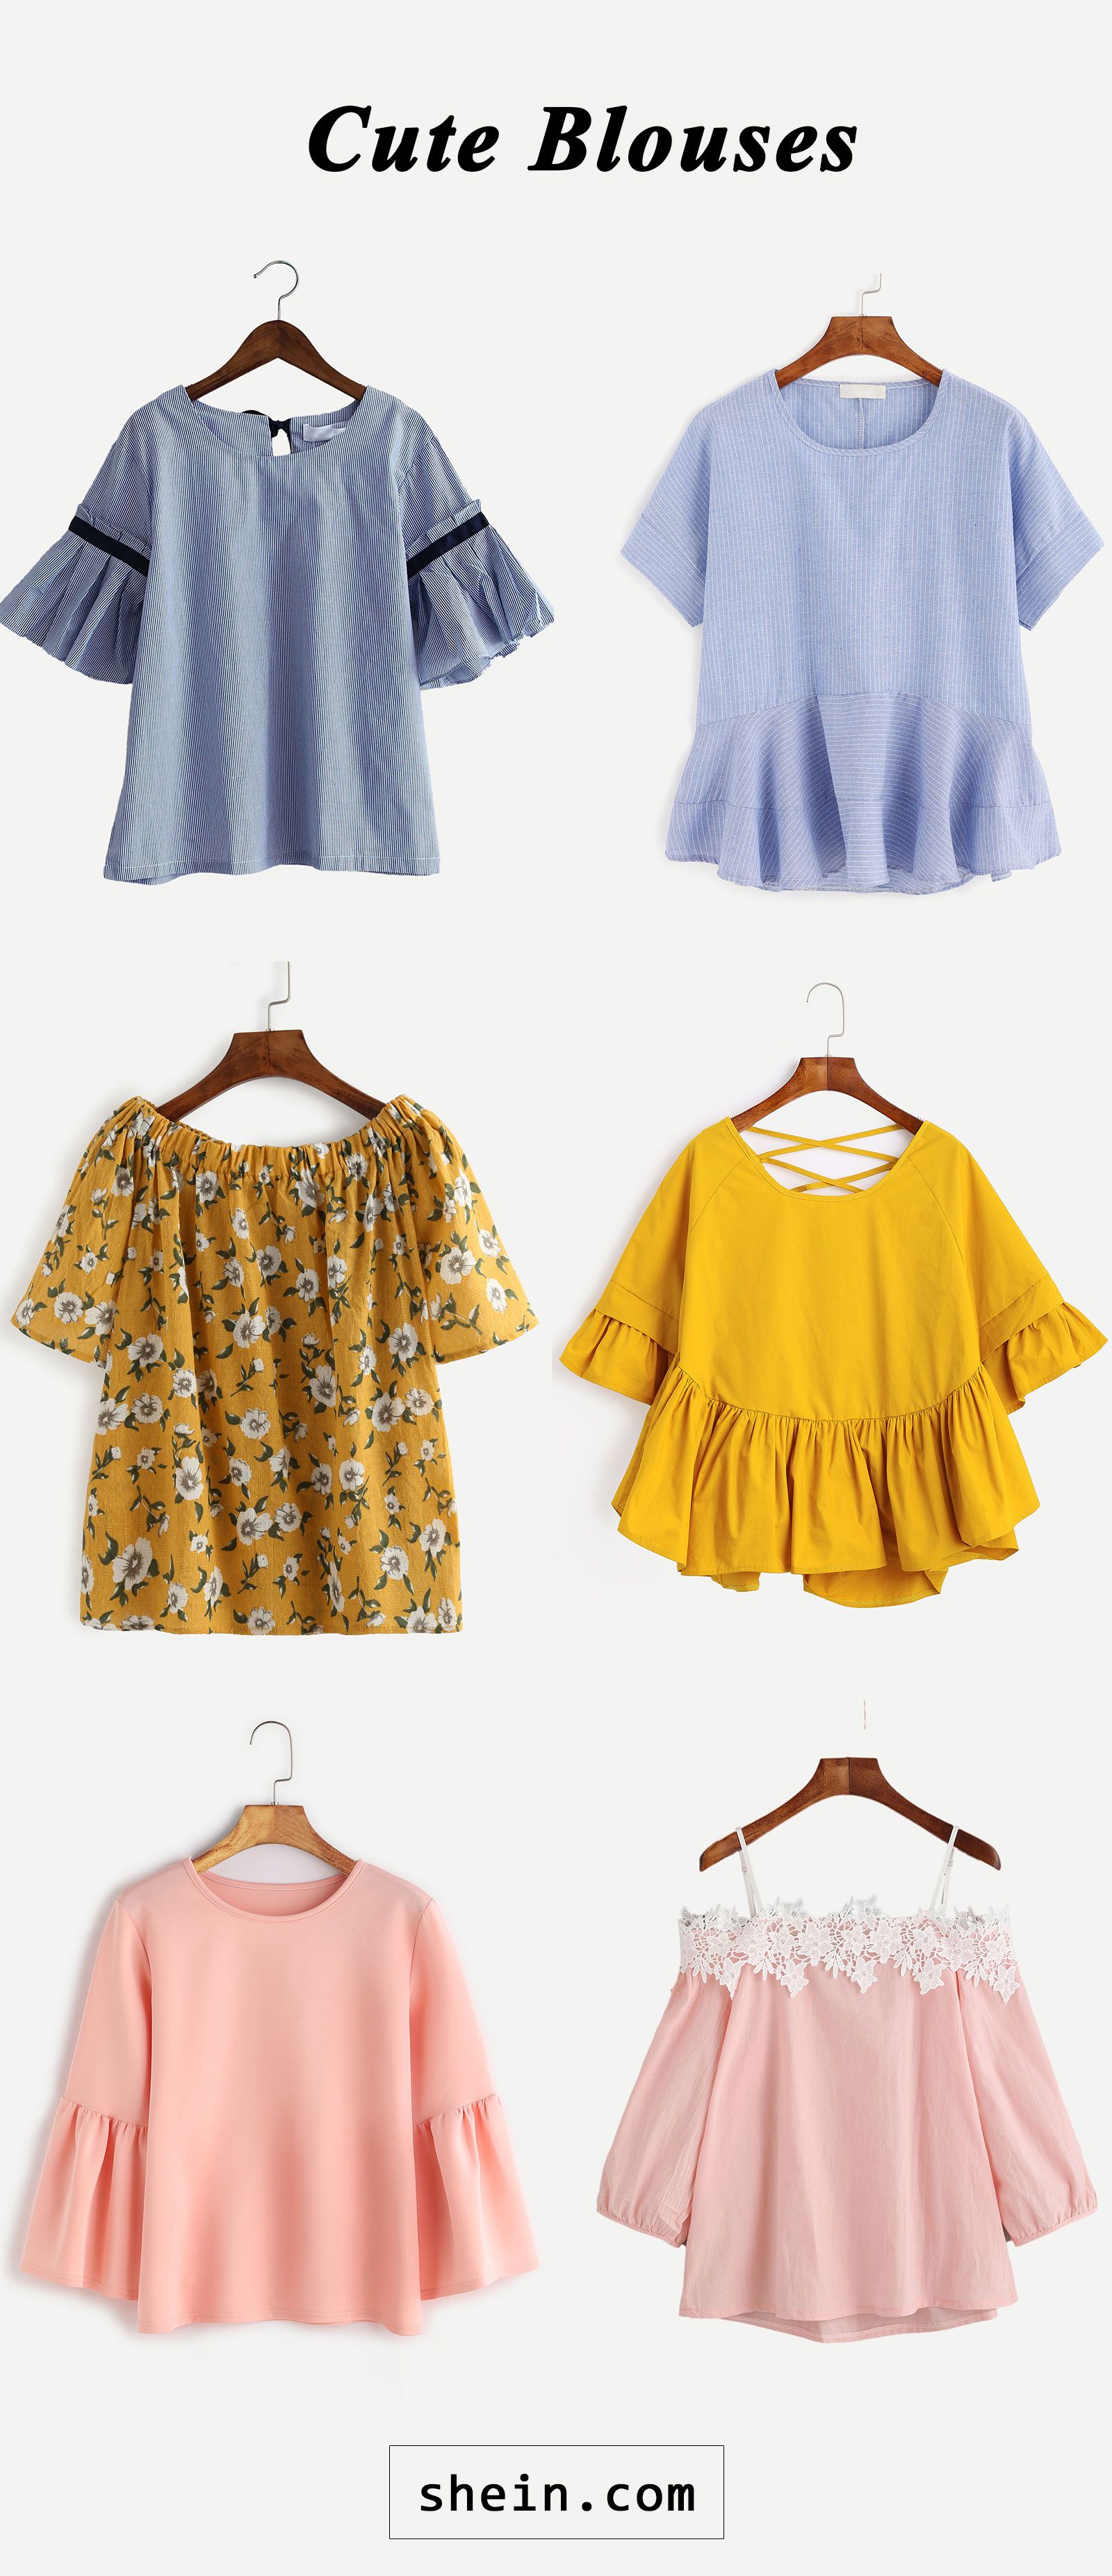 Cheap and cheerful blouses! http://Traveller Location/ Cute Cheap Shirts